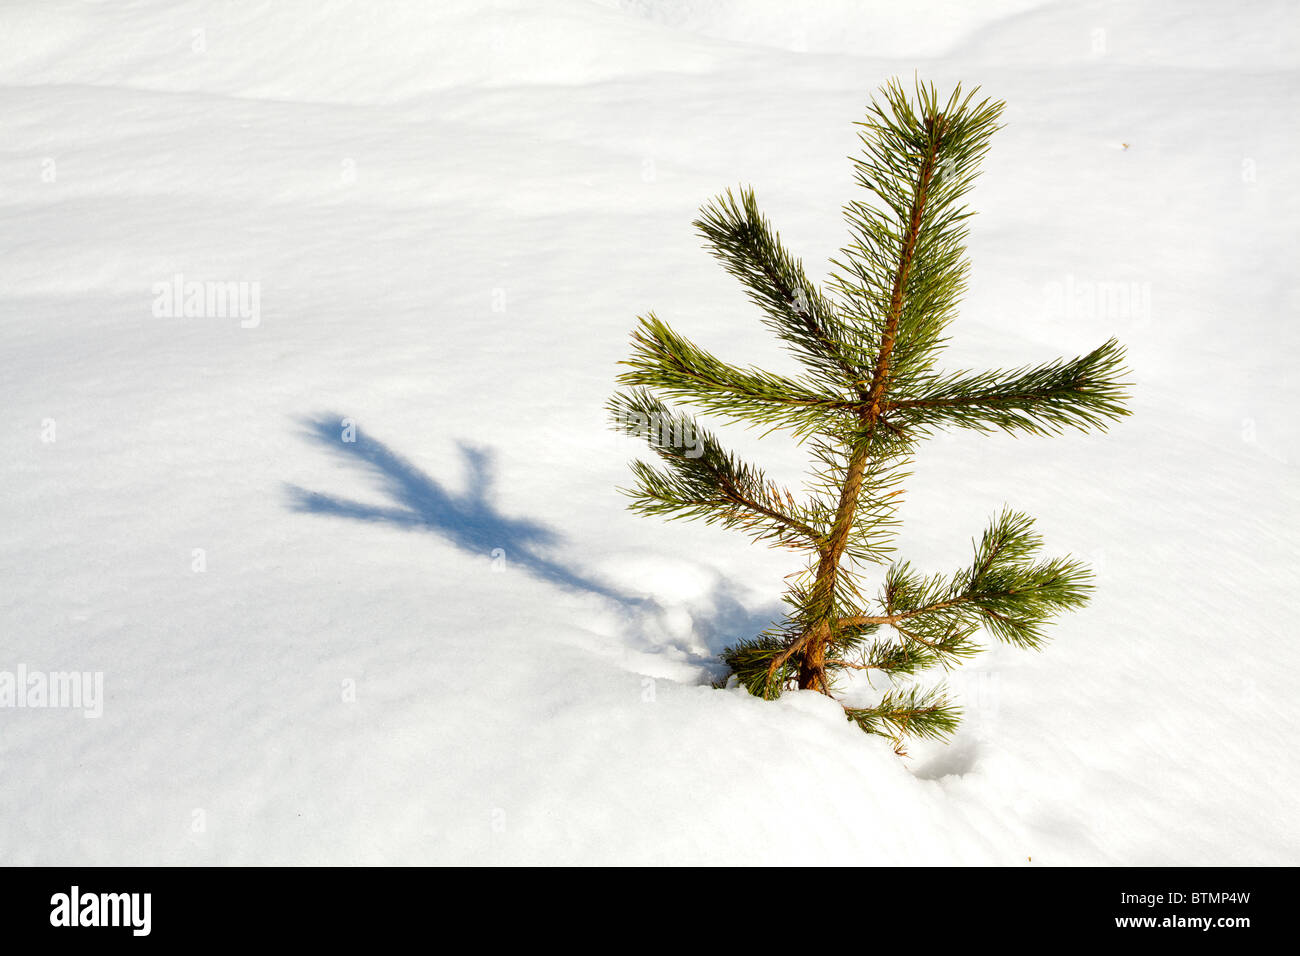 Scotland, Scottish Highlands, Cairngorms National Park. Snow covered Fir Trees in the Rothiemurchus Estate near Aviemore. Stock Photo